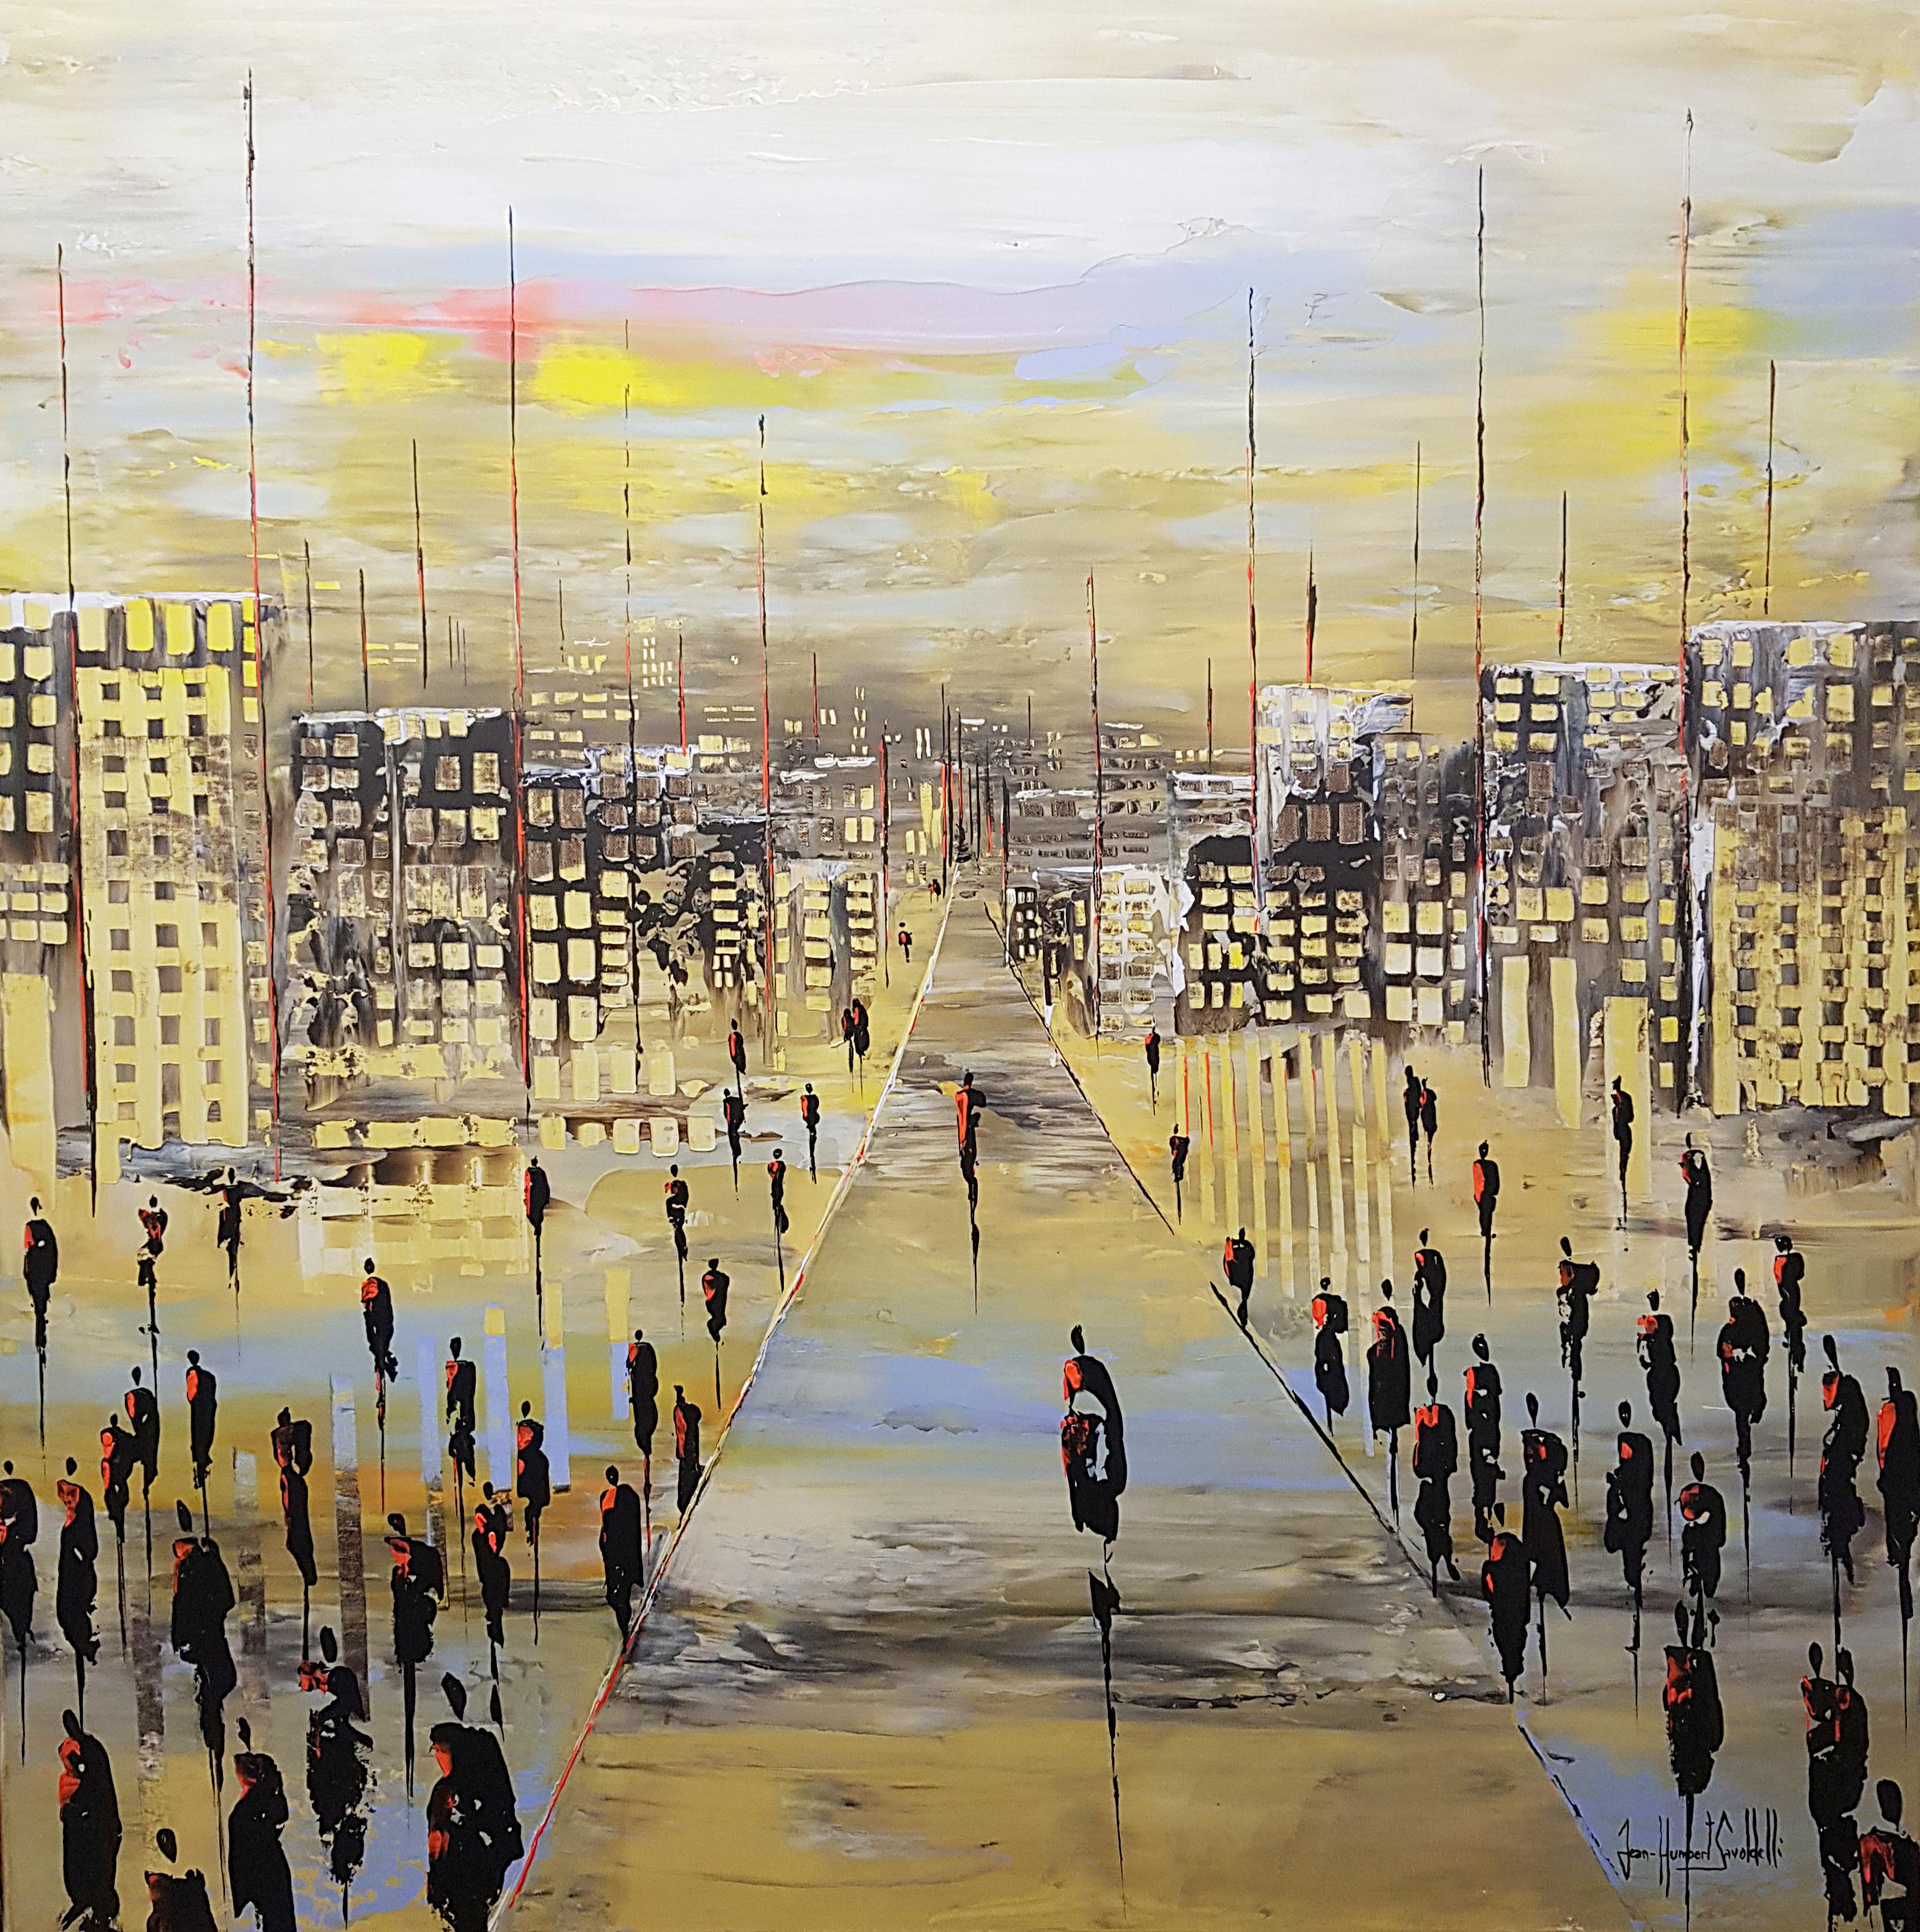 Jean-Humbert Savoldelli Abstract Painting – „Infinitely“, Yellow Road, City, People and Buildings Abstrakte Landschaft